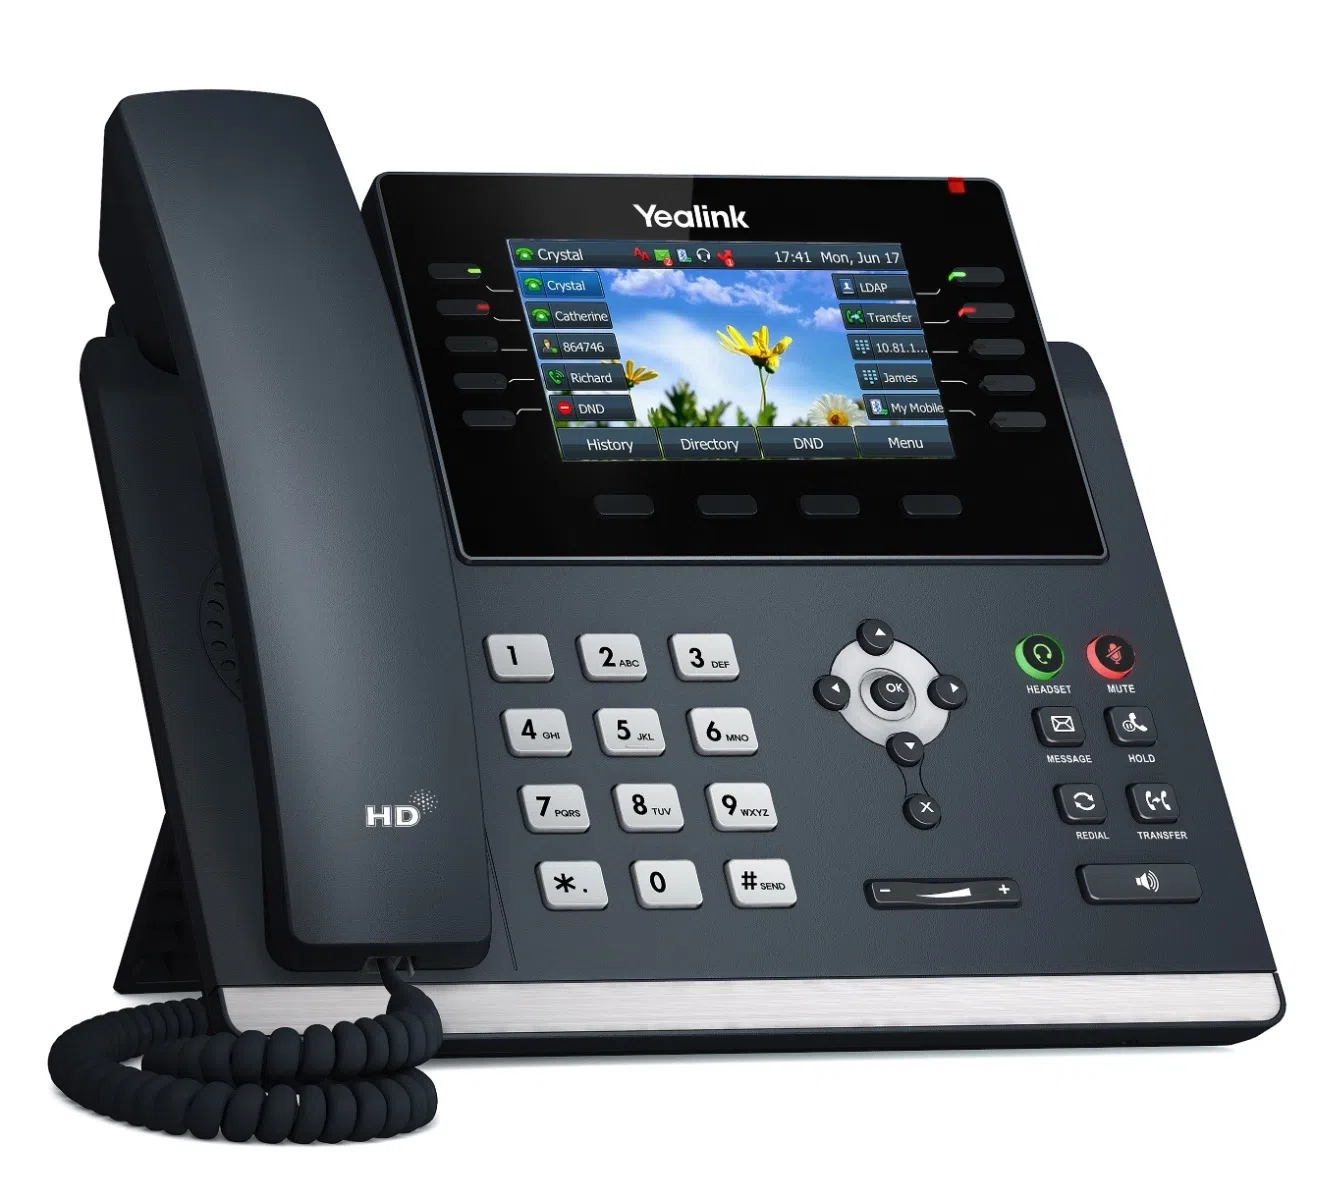 Does the Yealink SIP-T46U IP phone support Opus codec?